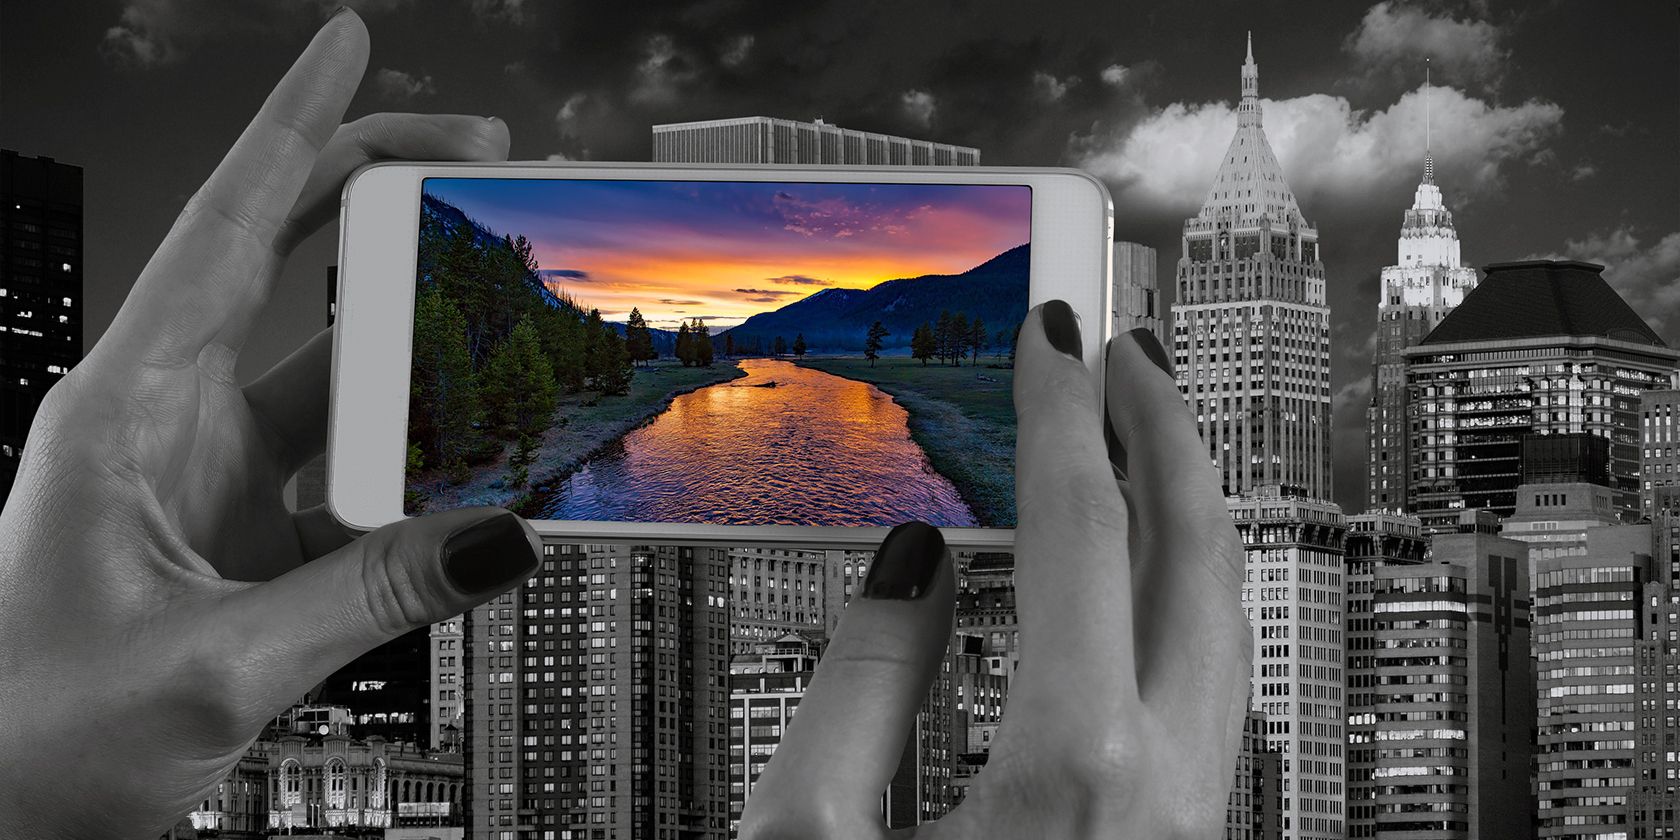 holding a smartphone with a photo of nature on its screen in front of a black and white city